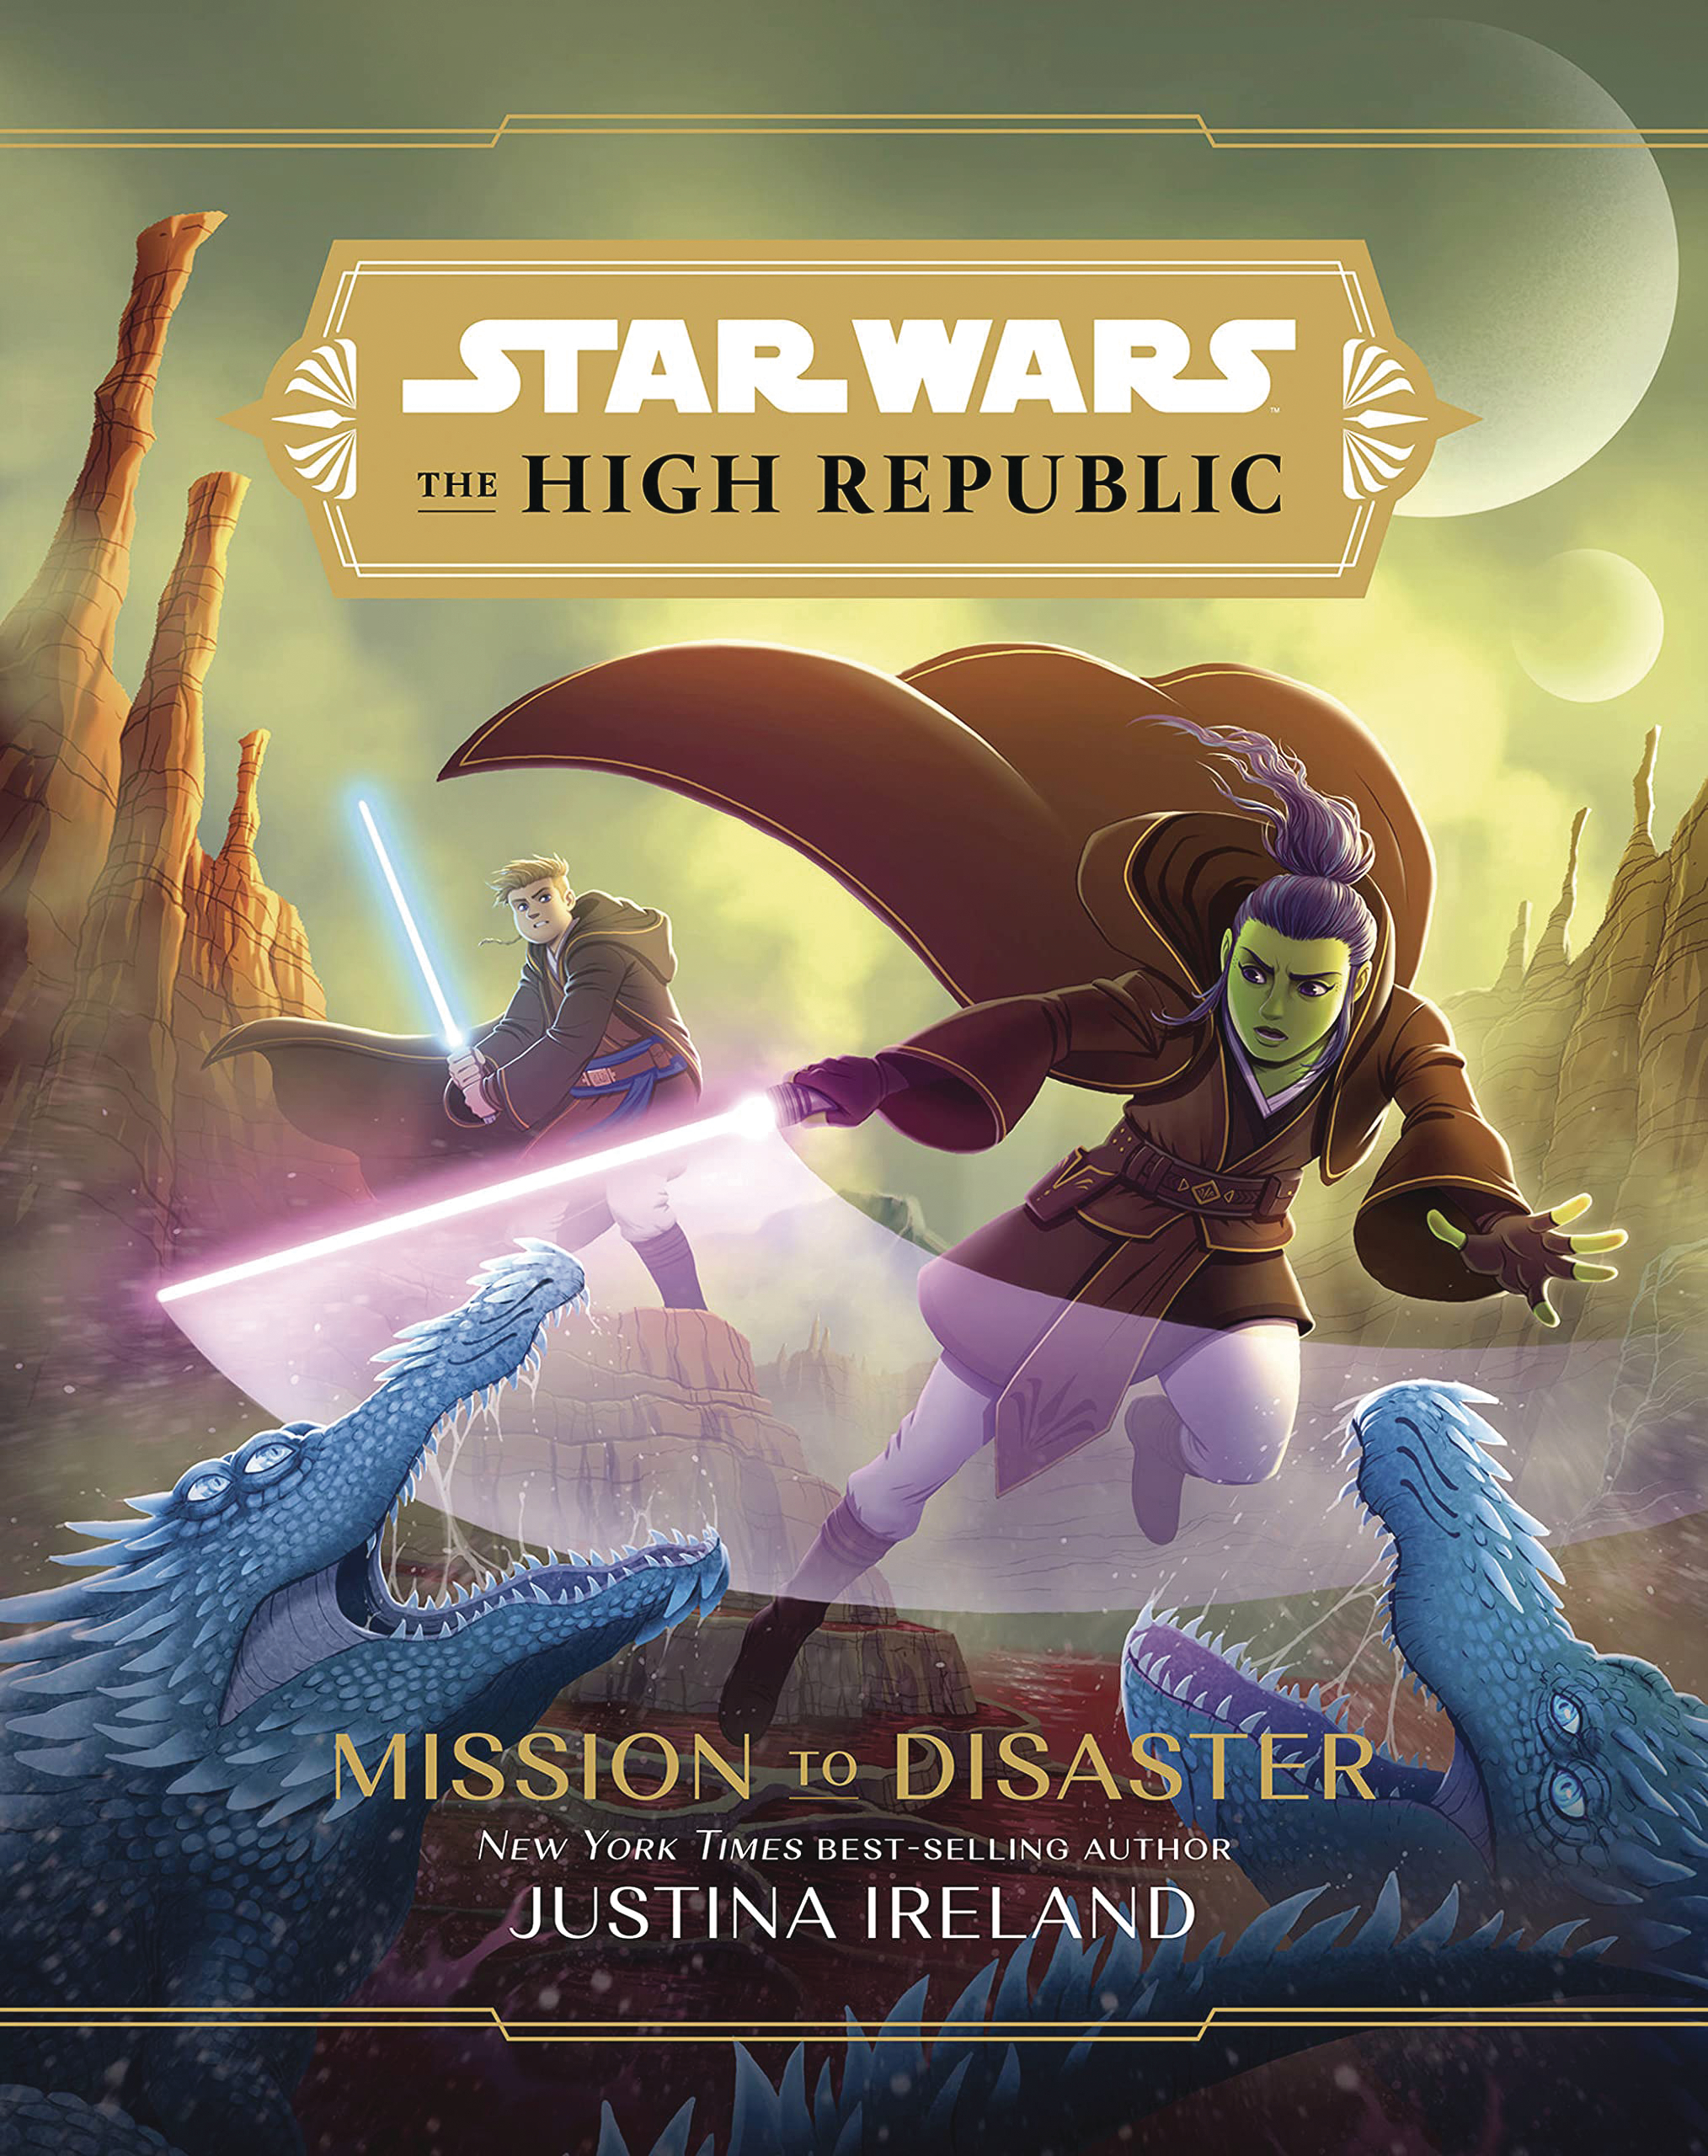 Star Wars the High Republic Ya Hardcover Novel #4 Mission To Disaster